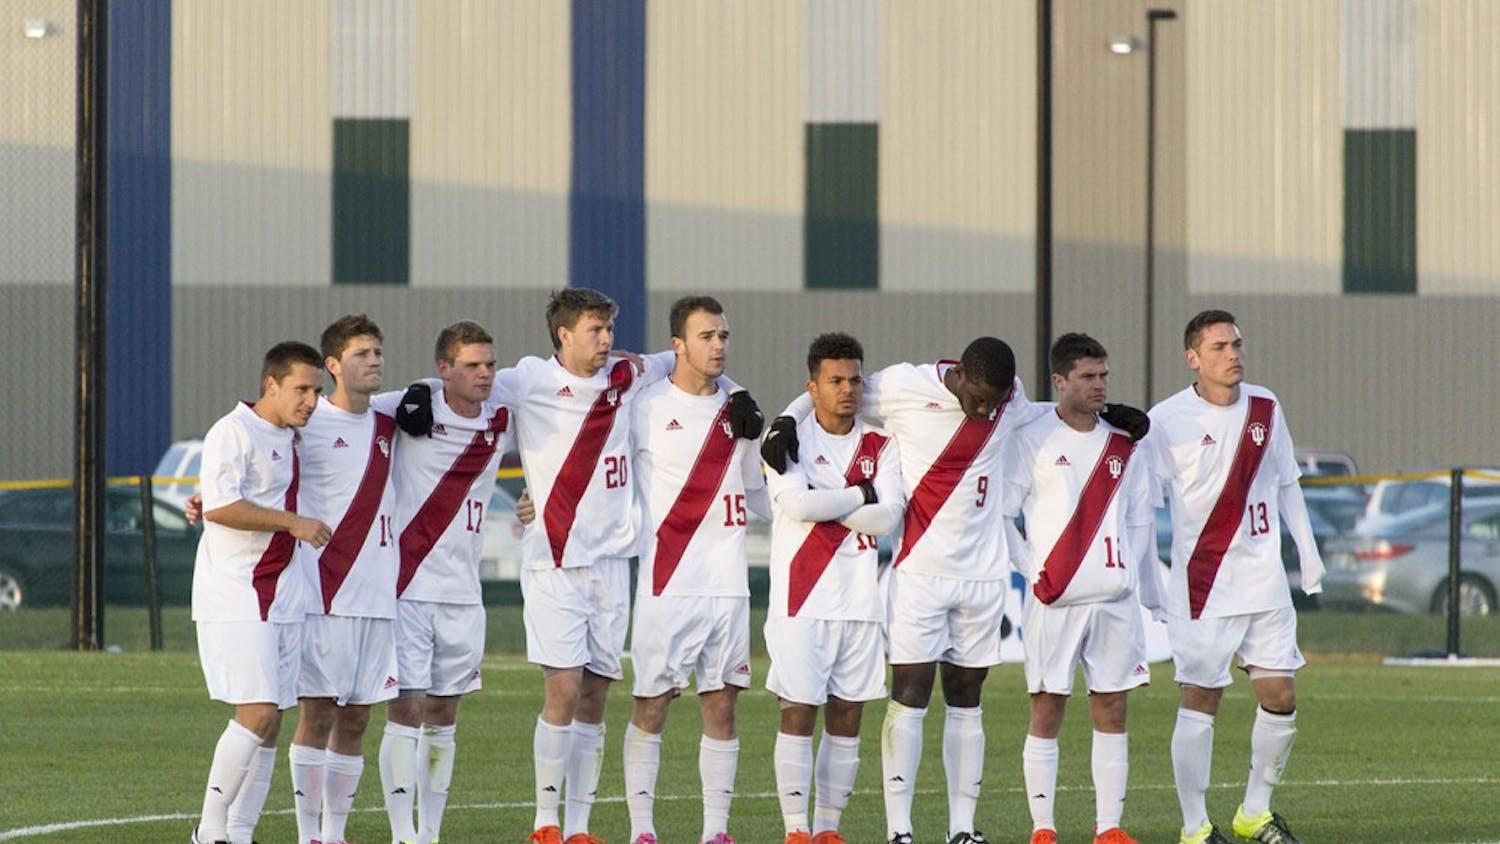 The Hoosiers during the Friday afternoon's penalty shootout loss (3-4) against Wisconsin at Grand Park.